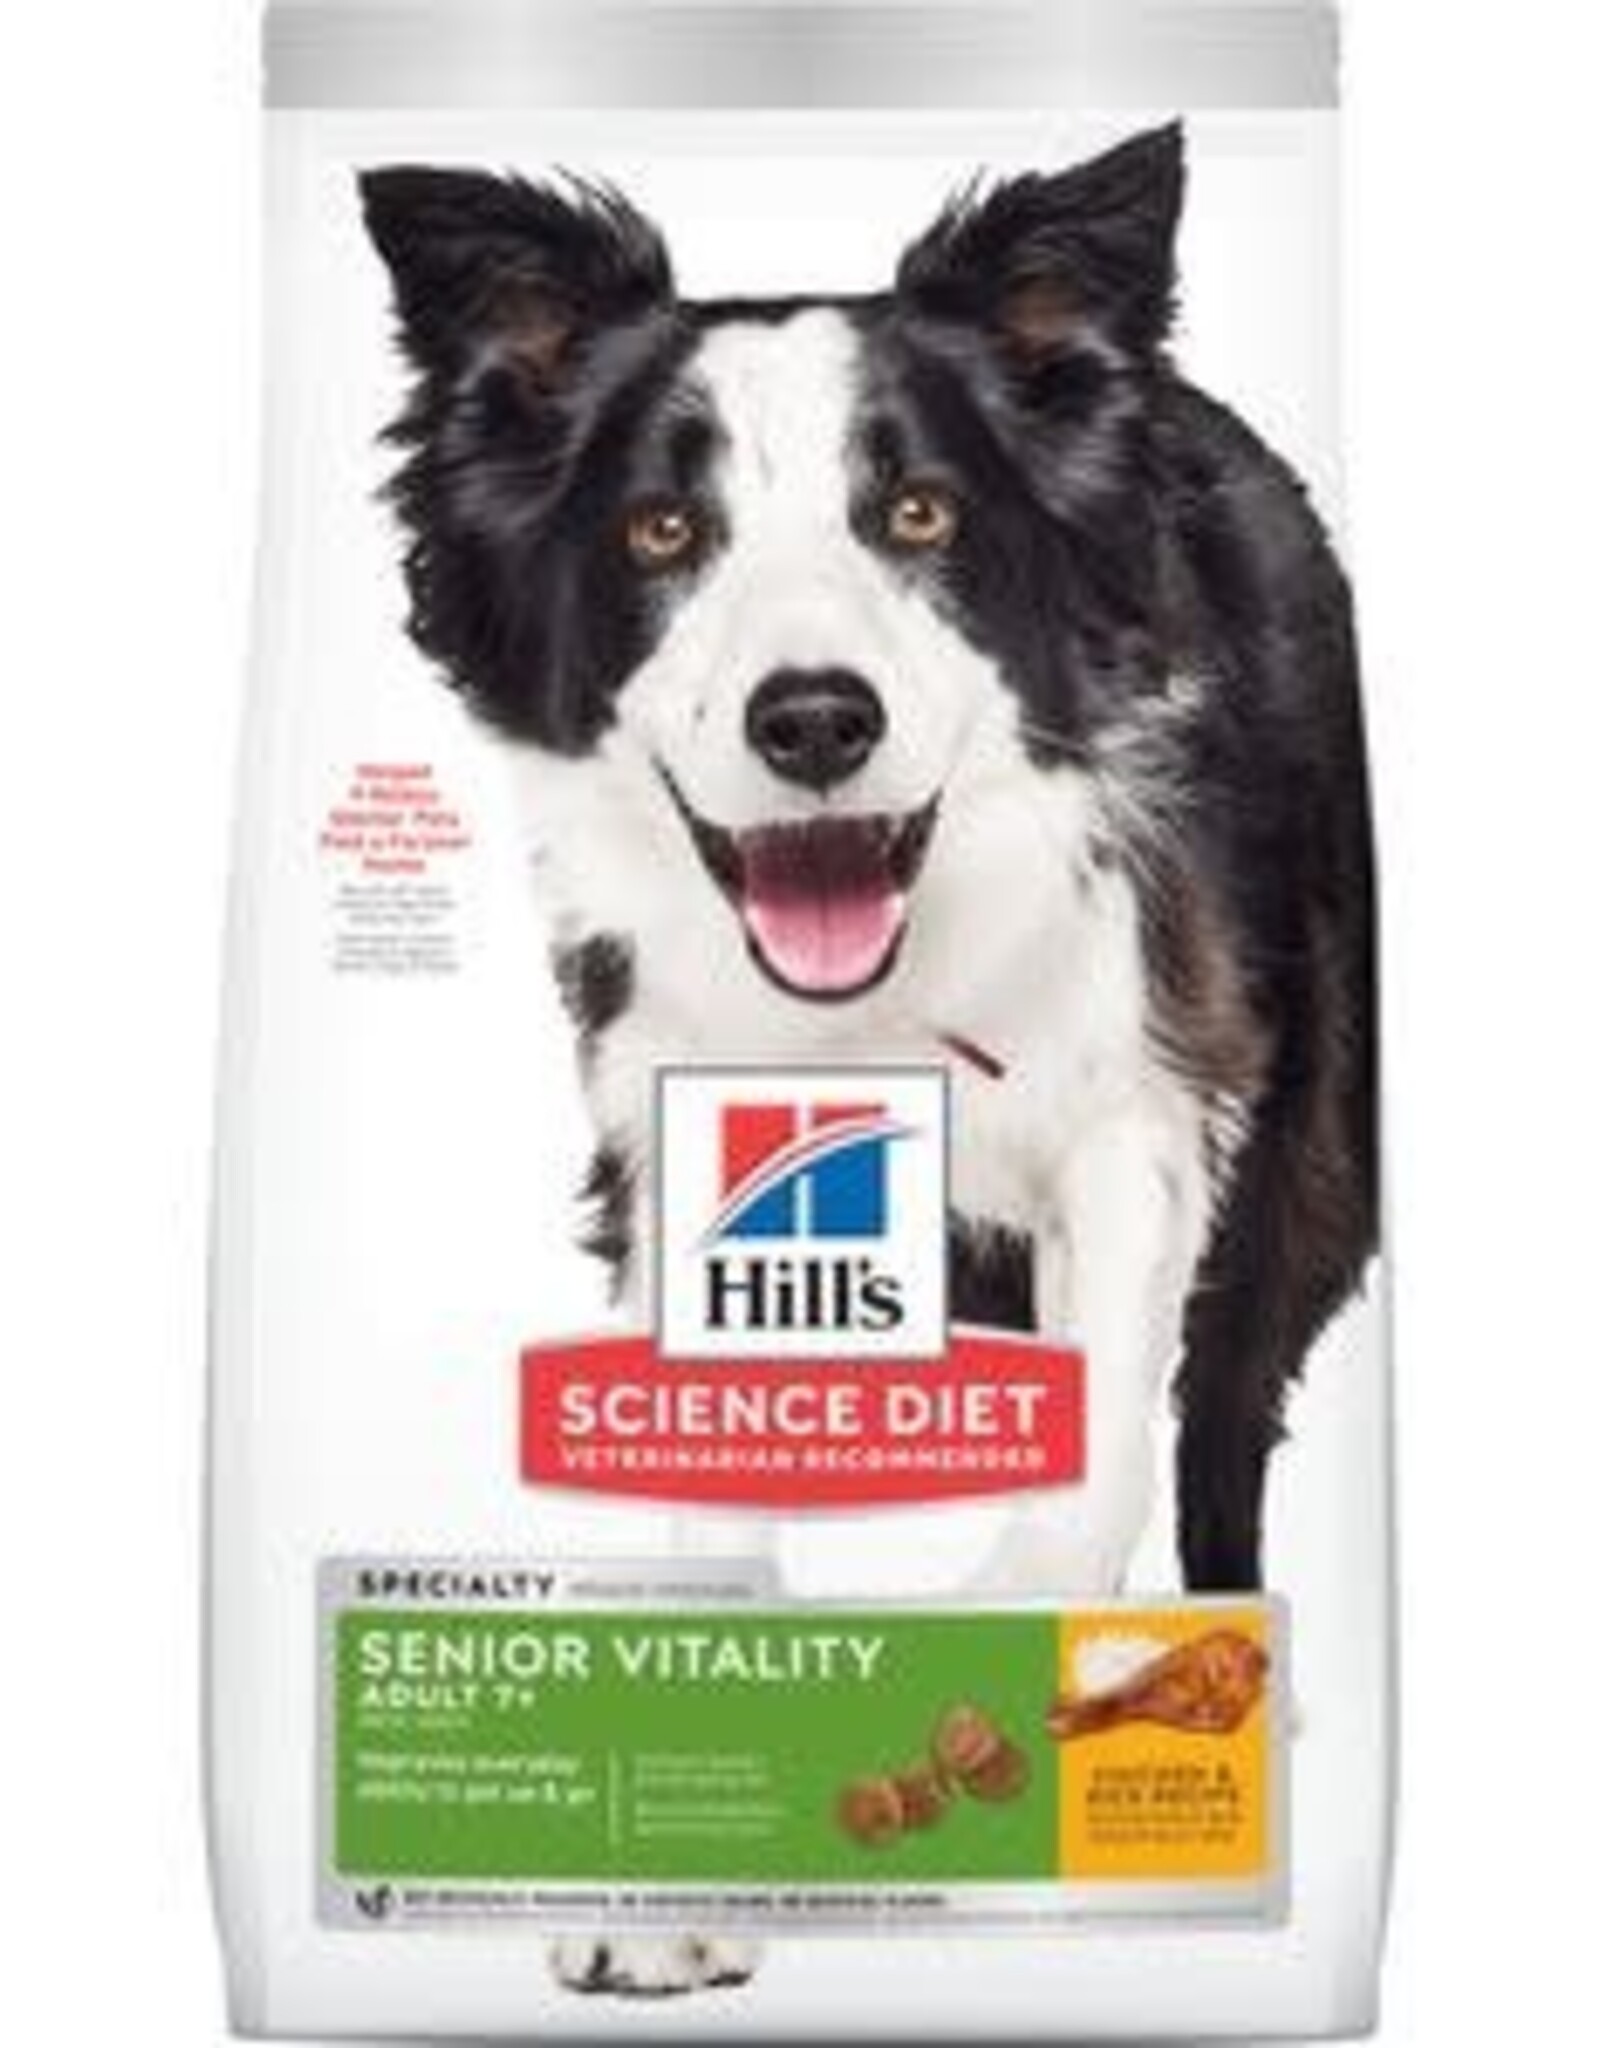 SCIENCE DIET HILL'S SCIENCE DIET CANINE ADULT 7+ YOUTHFUL VITALITY CHICKEN 21.5LBS